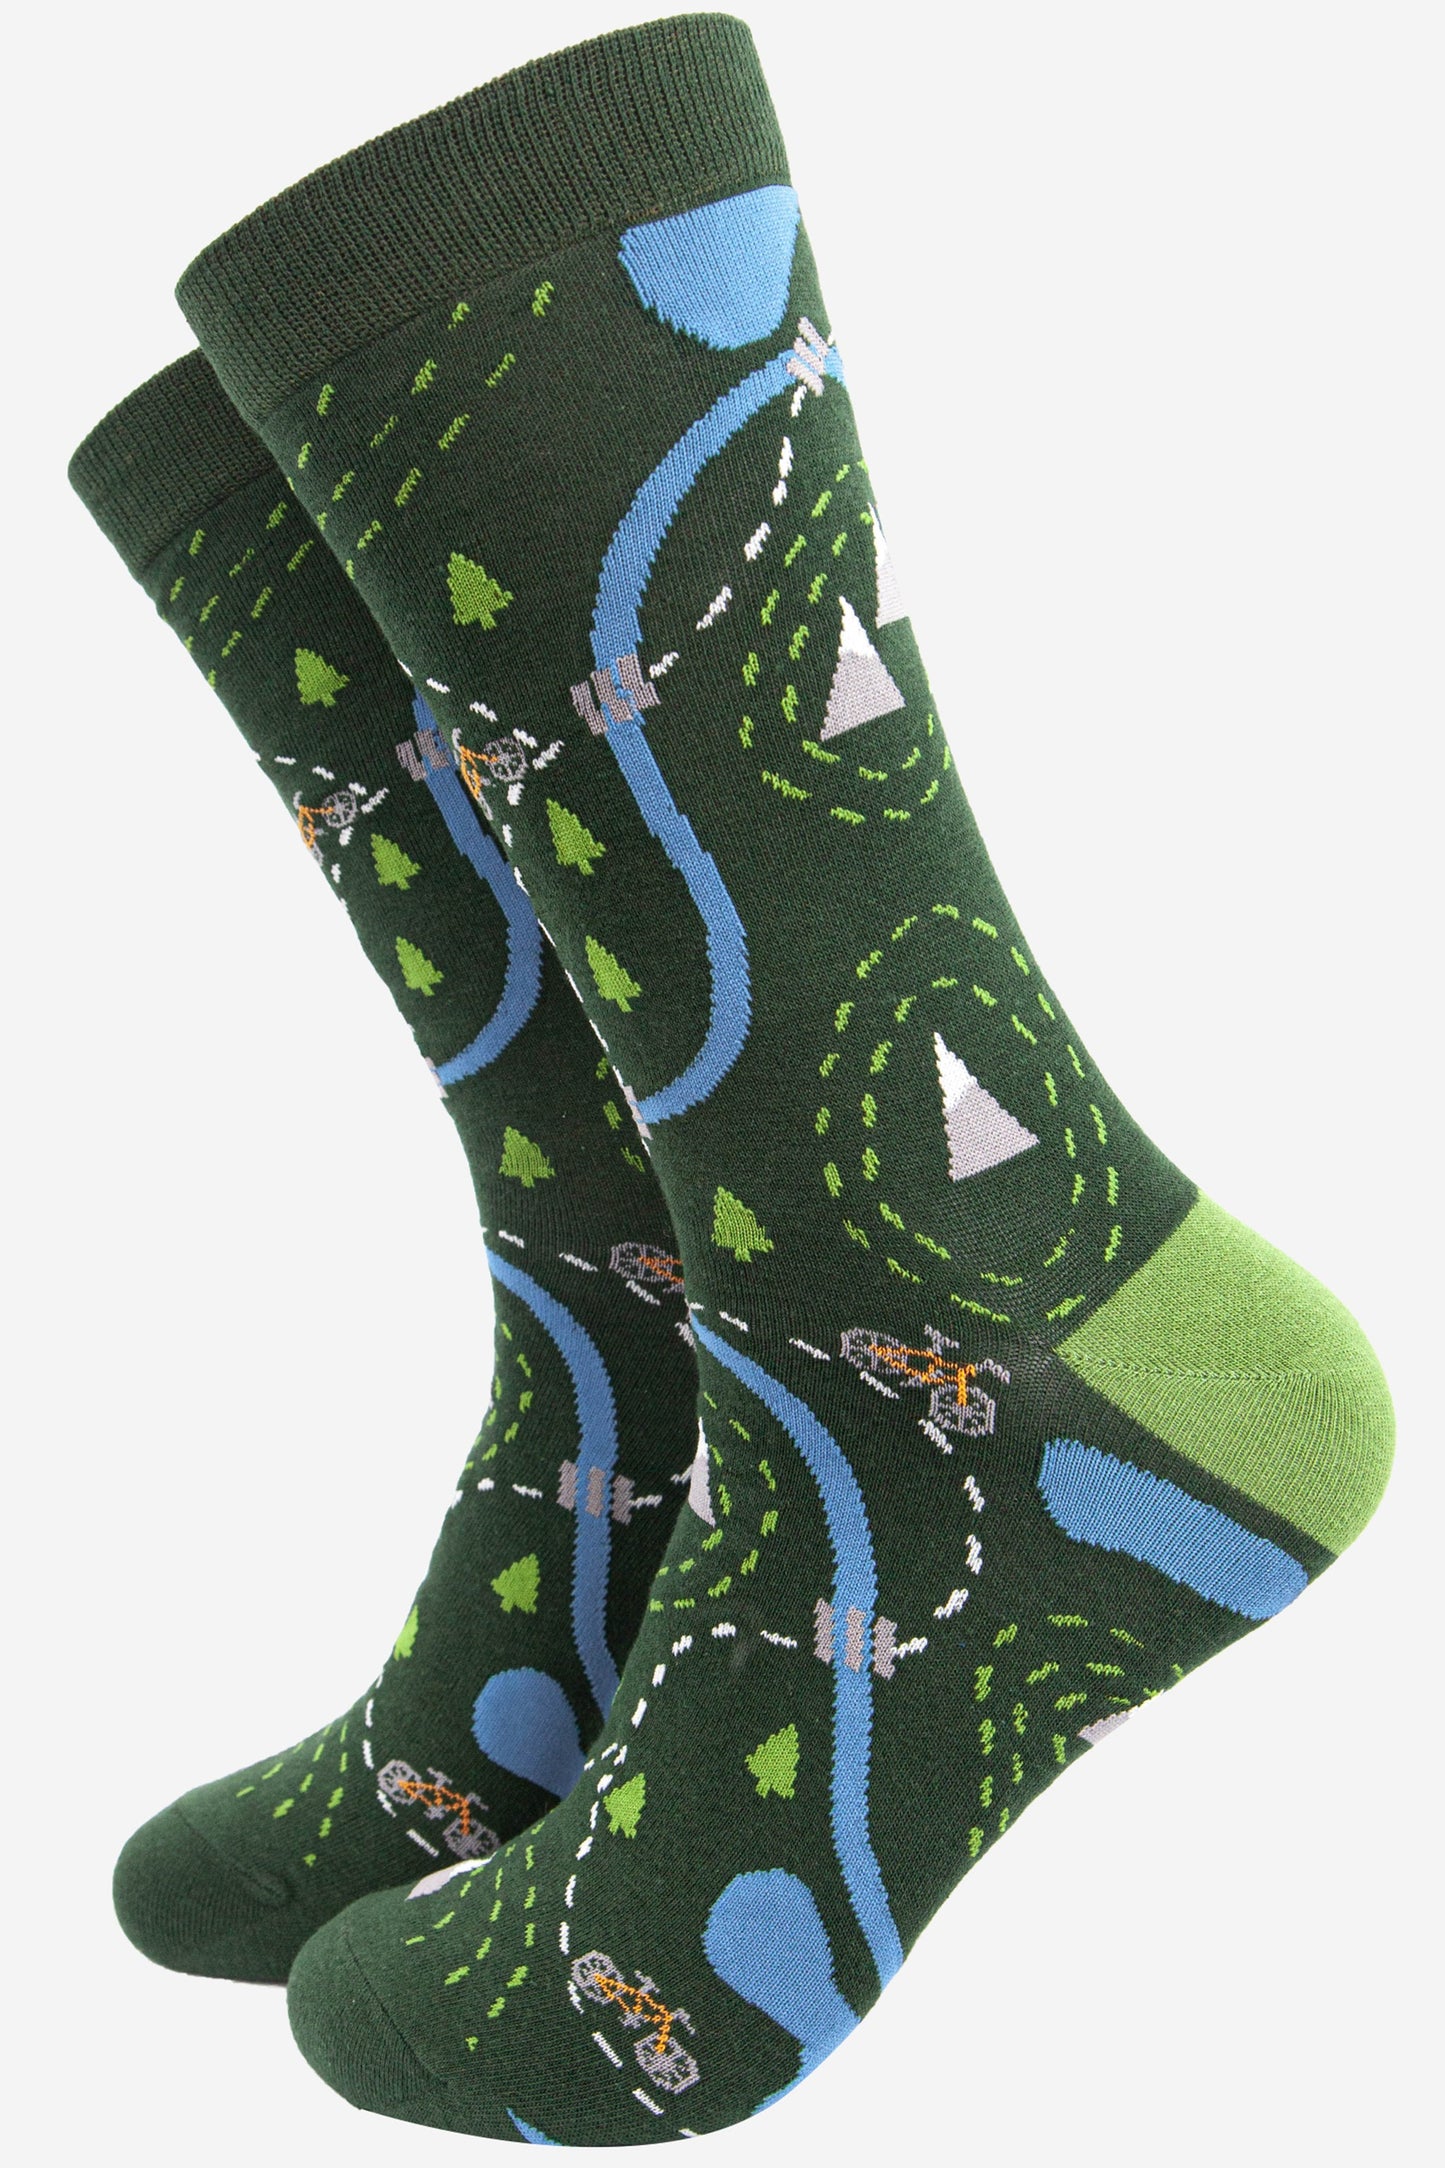 green bamboo socks designed to look like a biker route map featuring a yellow mountain bike, trees and mountains